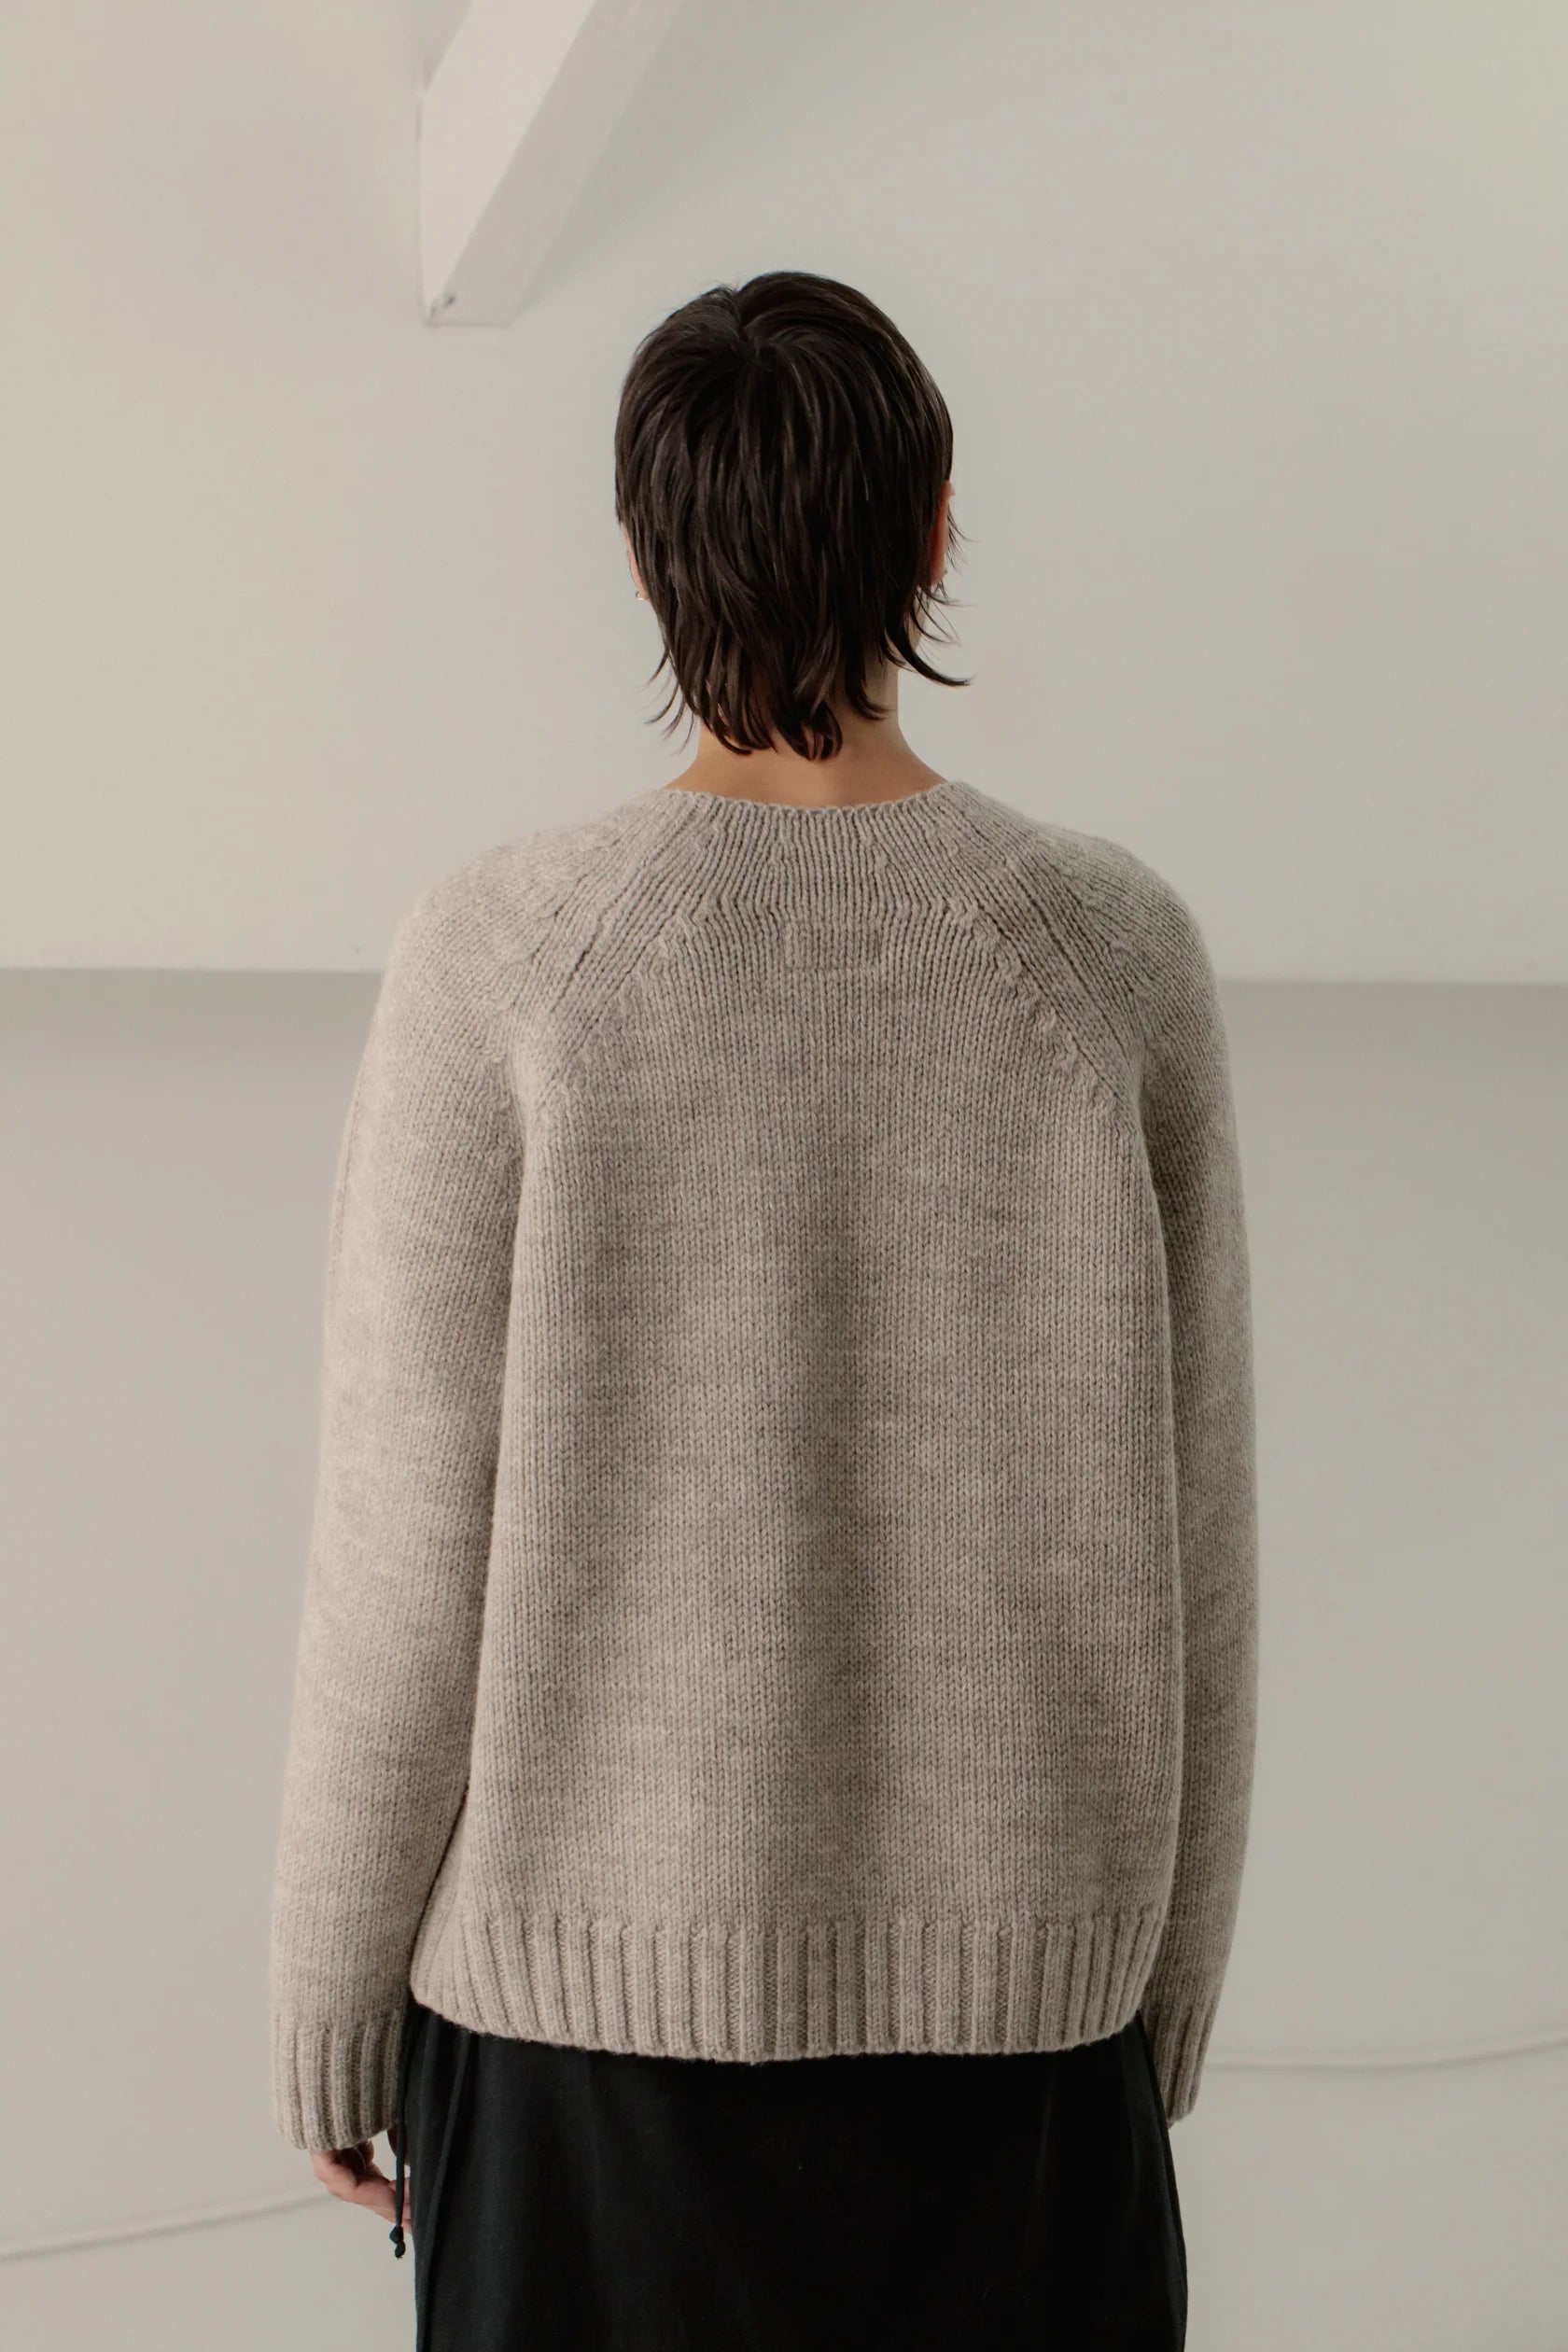 CHANNEL SWEATER - DRIFTWOOD - Assembly Showroom